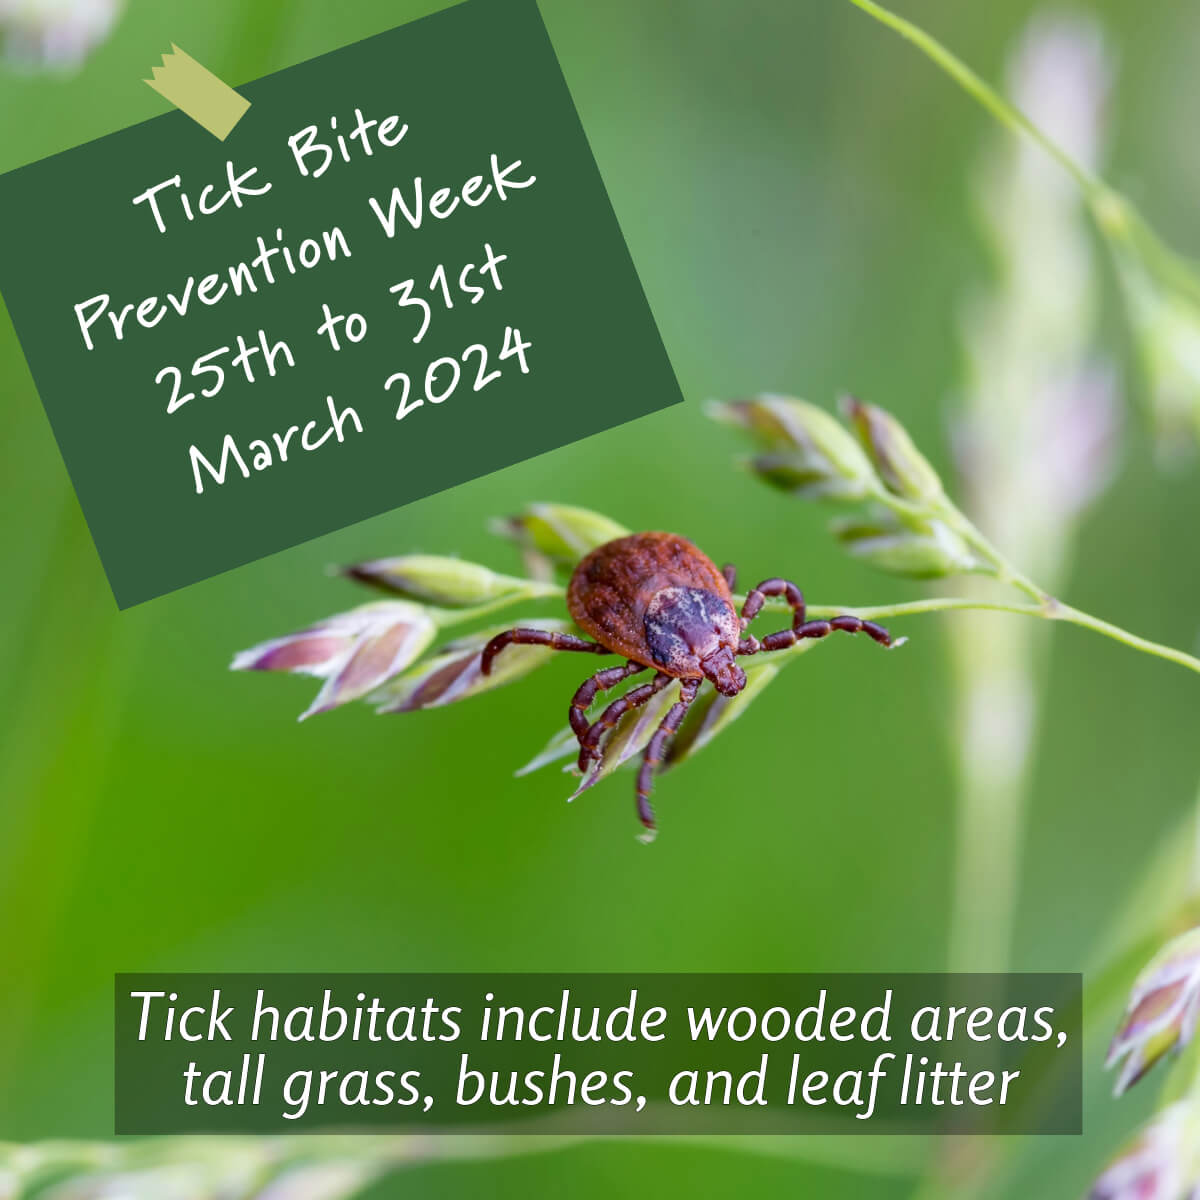 Tick habitats are diverse - from wooded areas and long grass to bushes and  leaf litter. Stay cautious and take precautions to prevent encounters. Your awareness is key! #TickPrevention #StayVigilant #TickHabitats #OutdoorSafety #StaySafeOutdoors